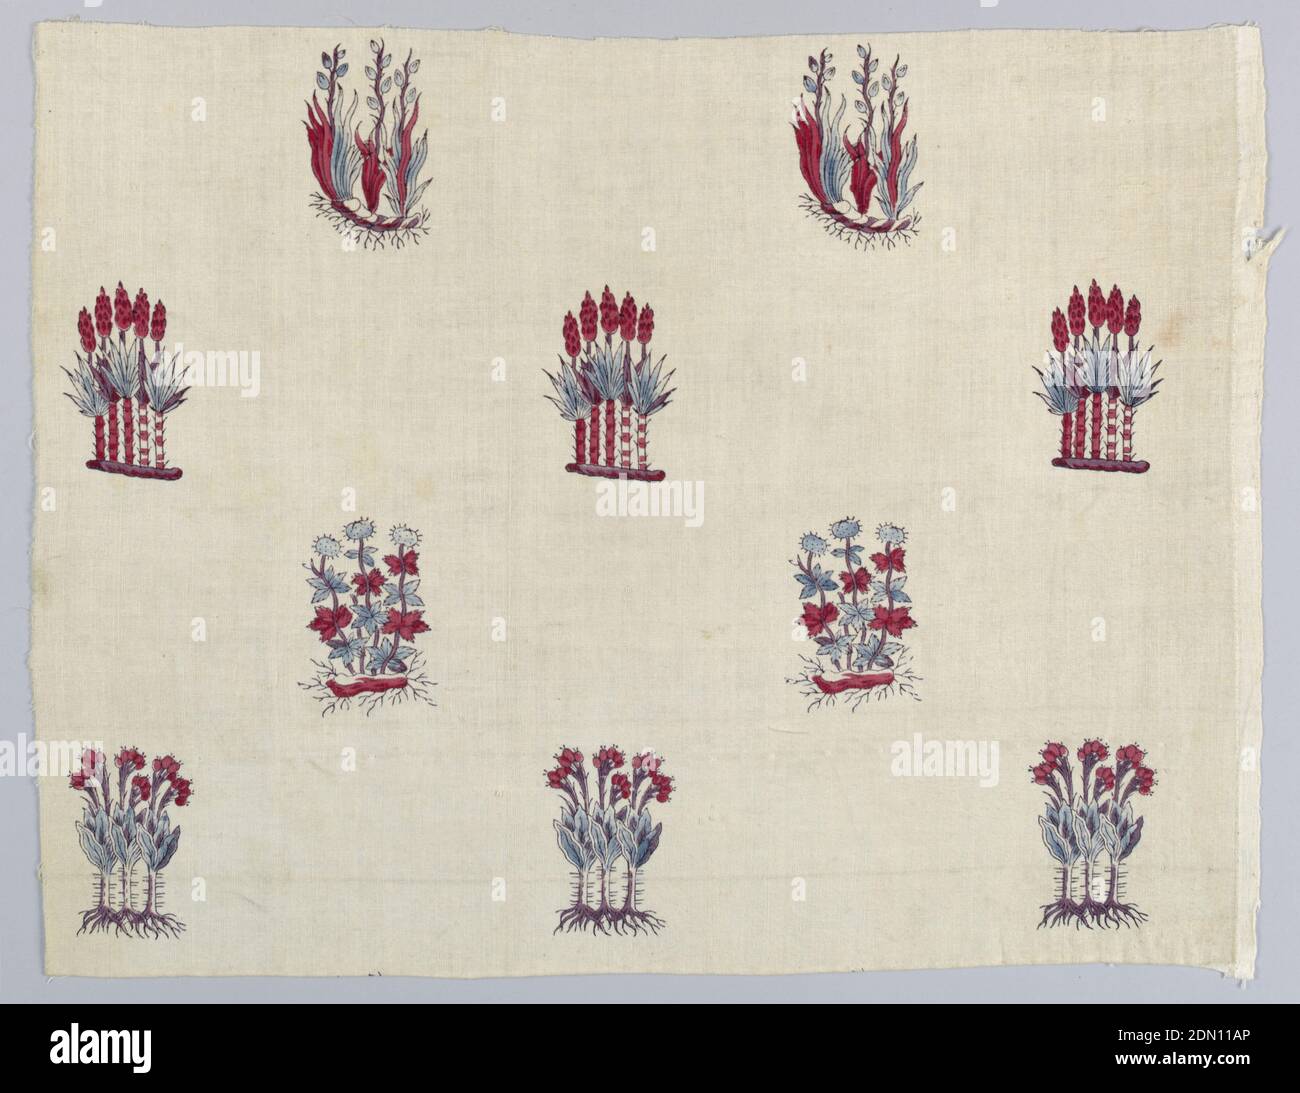 Textile, Medium: cotton Technique: block printed on plain weave, Fragment of cream white cotton, block printed in detached design of small flower clusters and clusters of buds, with roots showing; colors now appearing, red, brown and blue. Manufacture de Toiles Peintes de Pourtales and C. a Minster en Alsa ---. This piece was cut by donor from piece illustrated in Clouzot, Plate 66, showing factory stamp as given., Munster, Switzerland, 18th century, printed, dyed & painted textiles, Textile Stock Photo